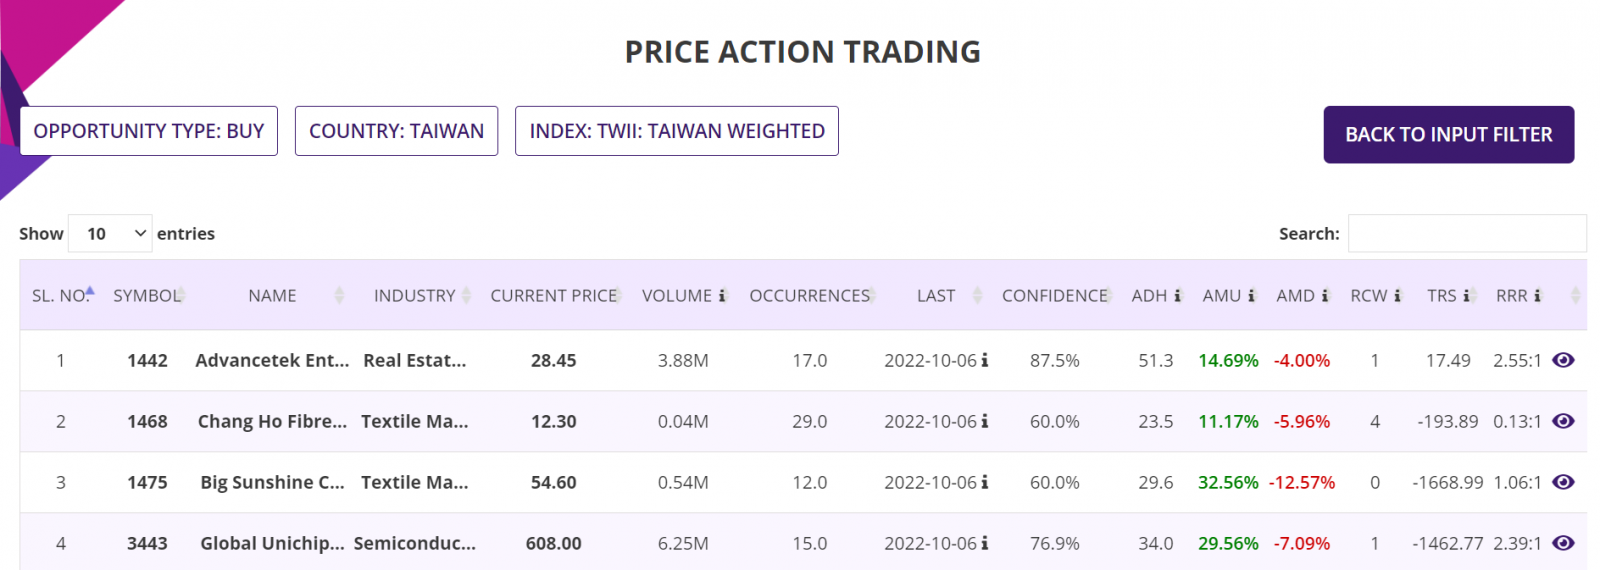 Price Action trading strategy, summary report, Taiwan Stocks